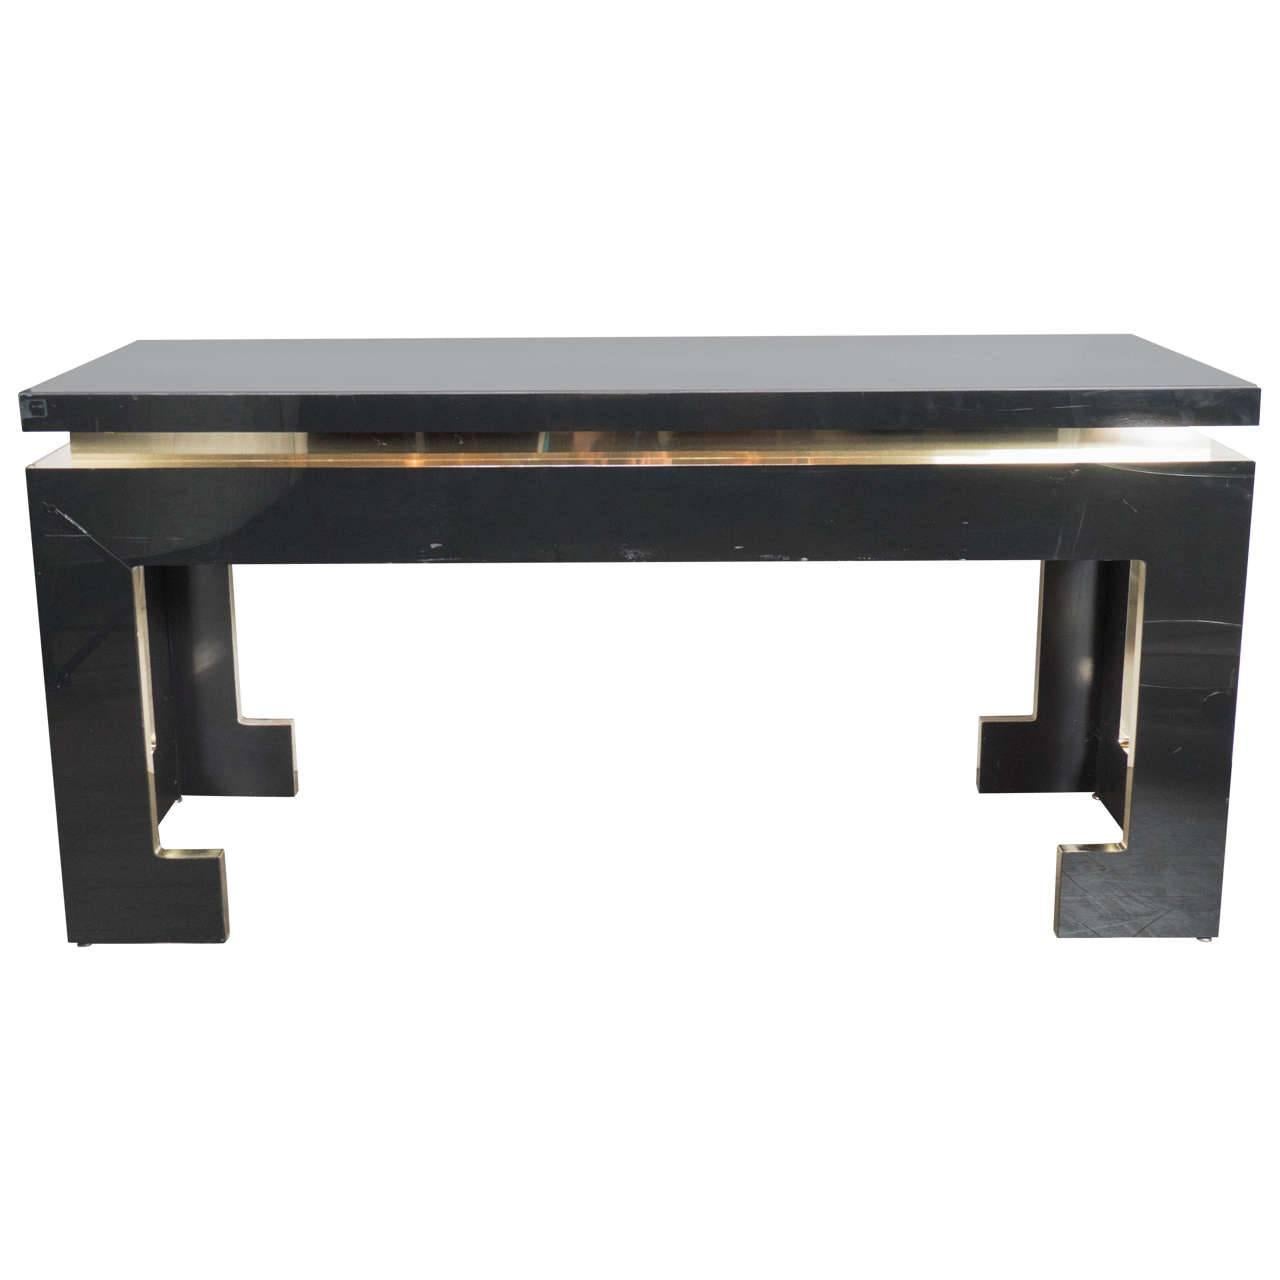 Ultra Chic Mid-Century Modernist Console or Sofa Table with Greek Key Styling